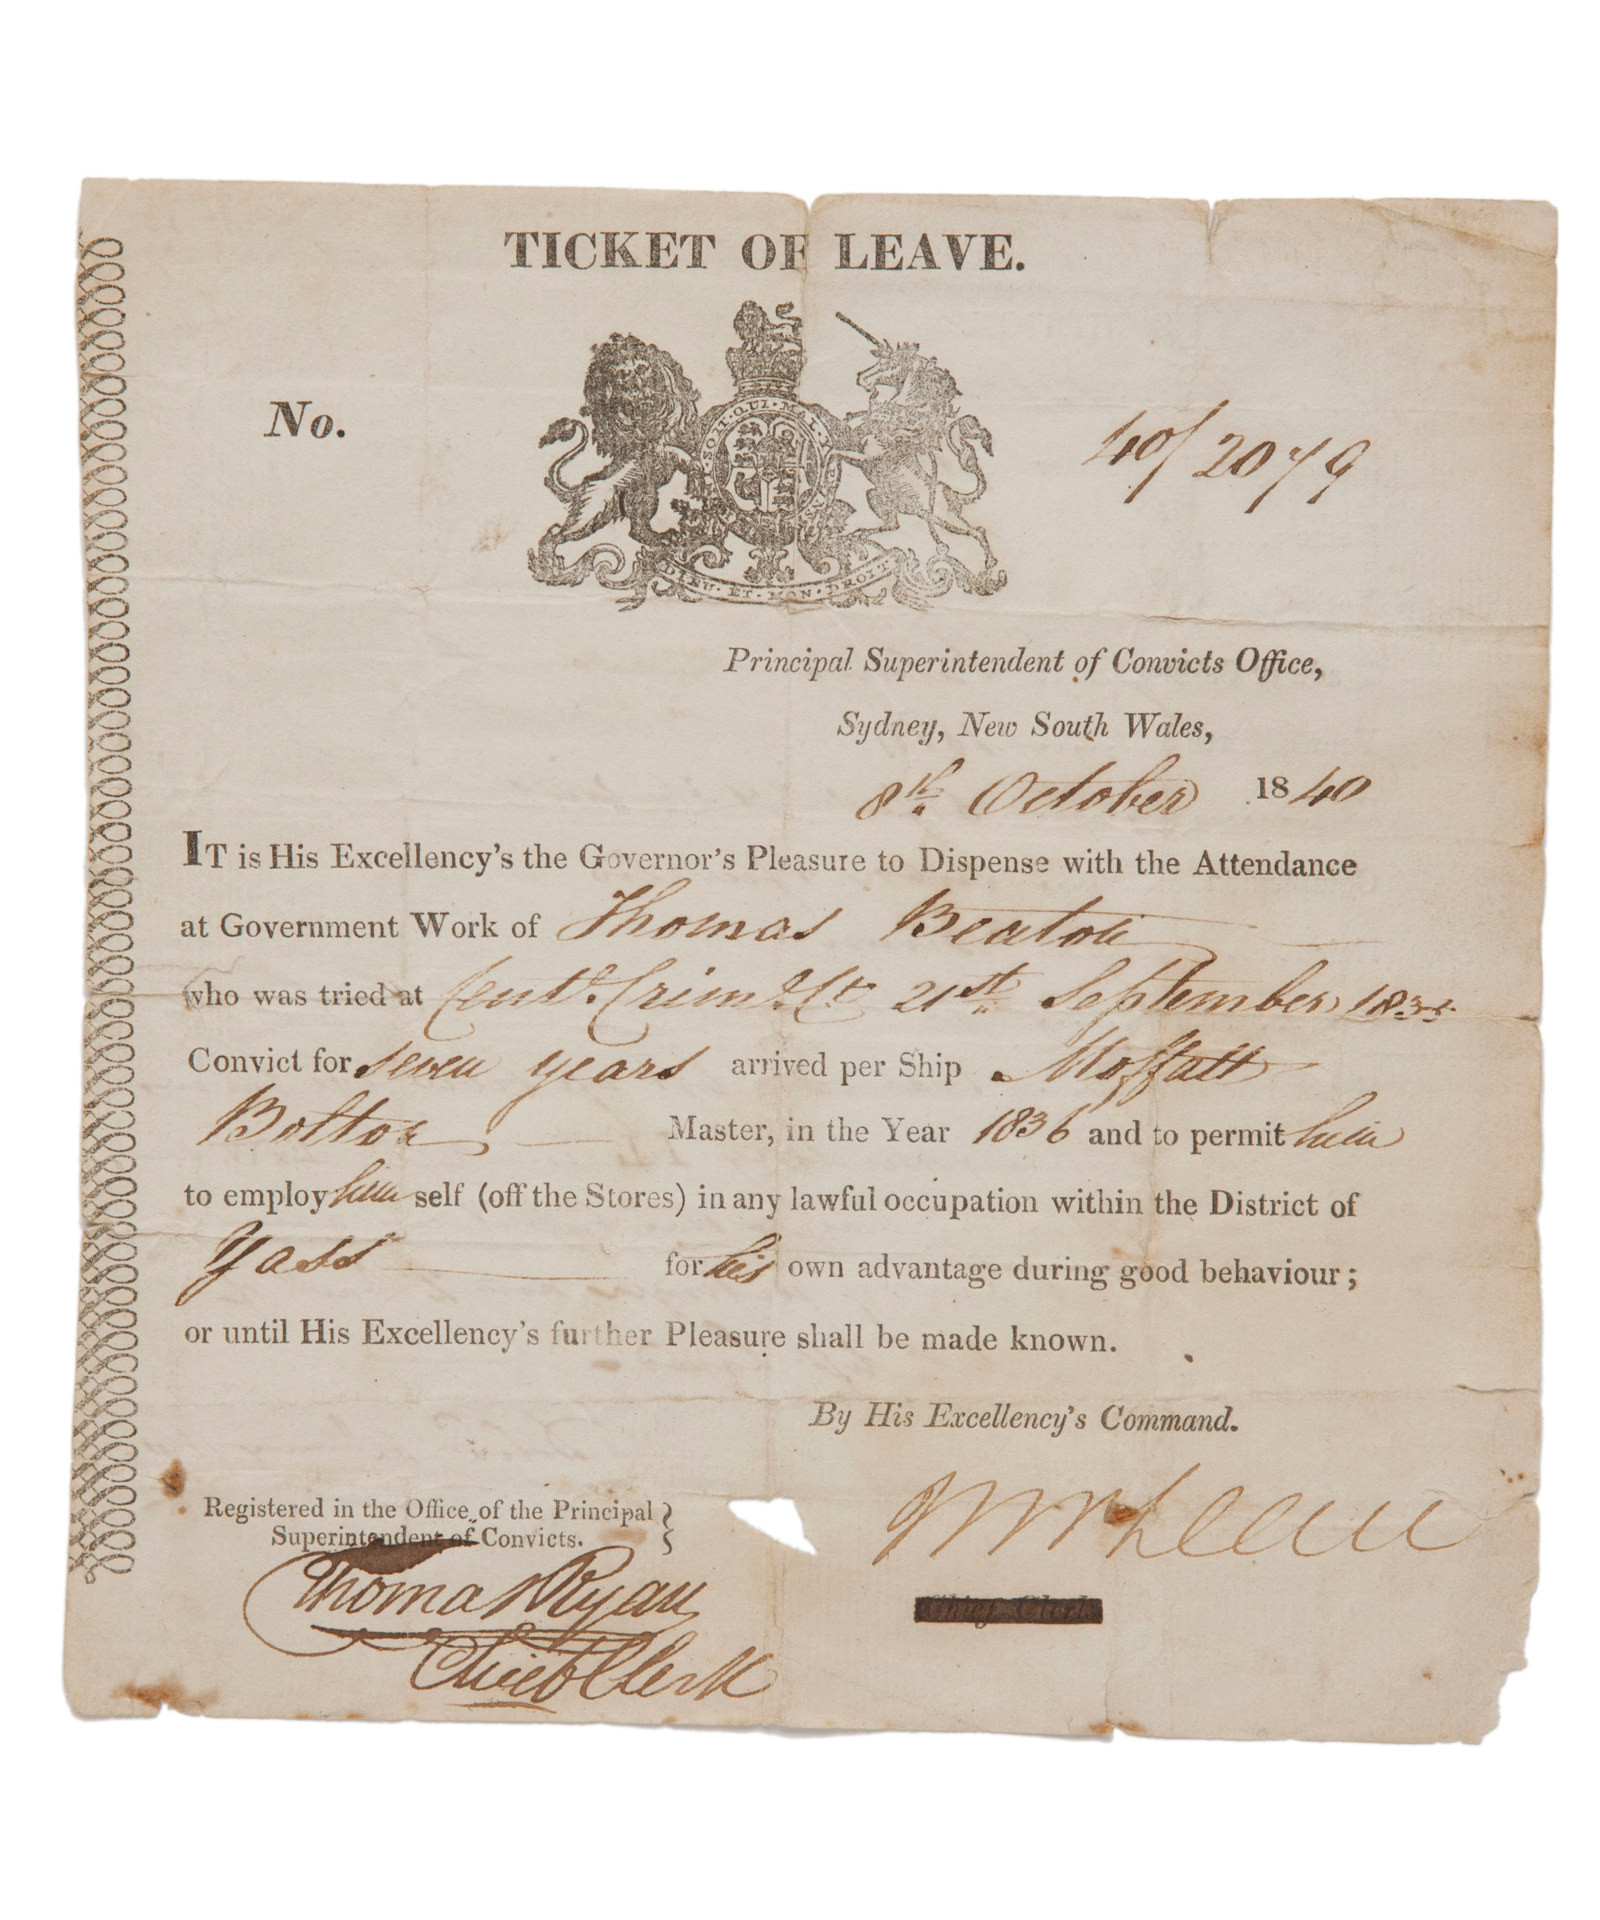 Ticket of Leave allowing convict Thomas Beaton to work in Yass, issued 8.10.1840